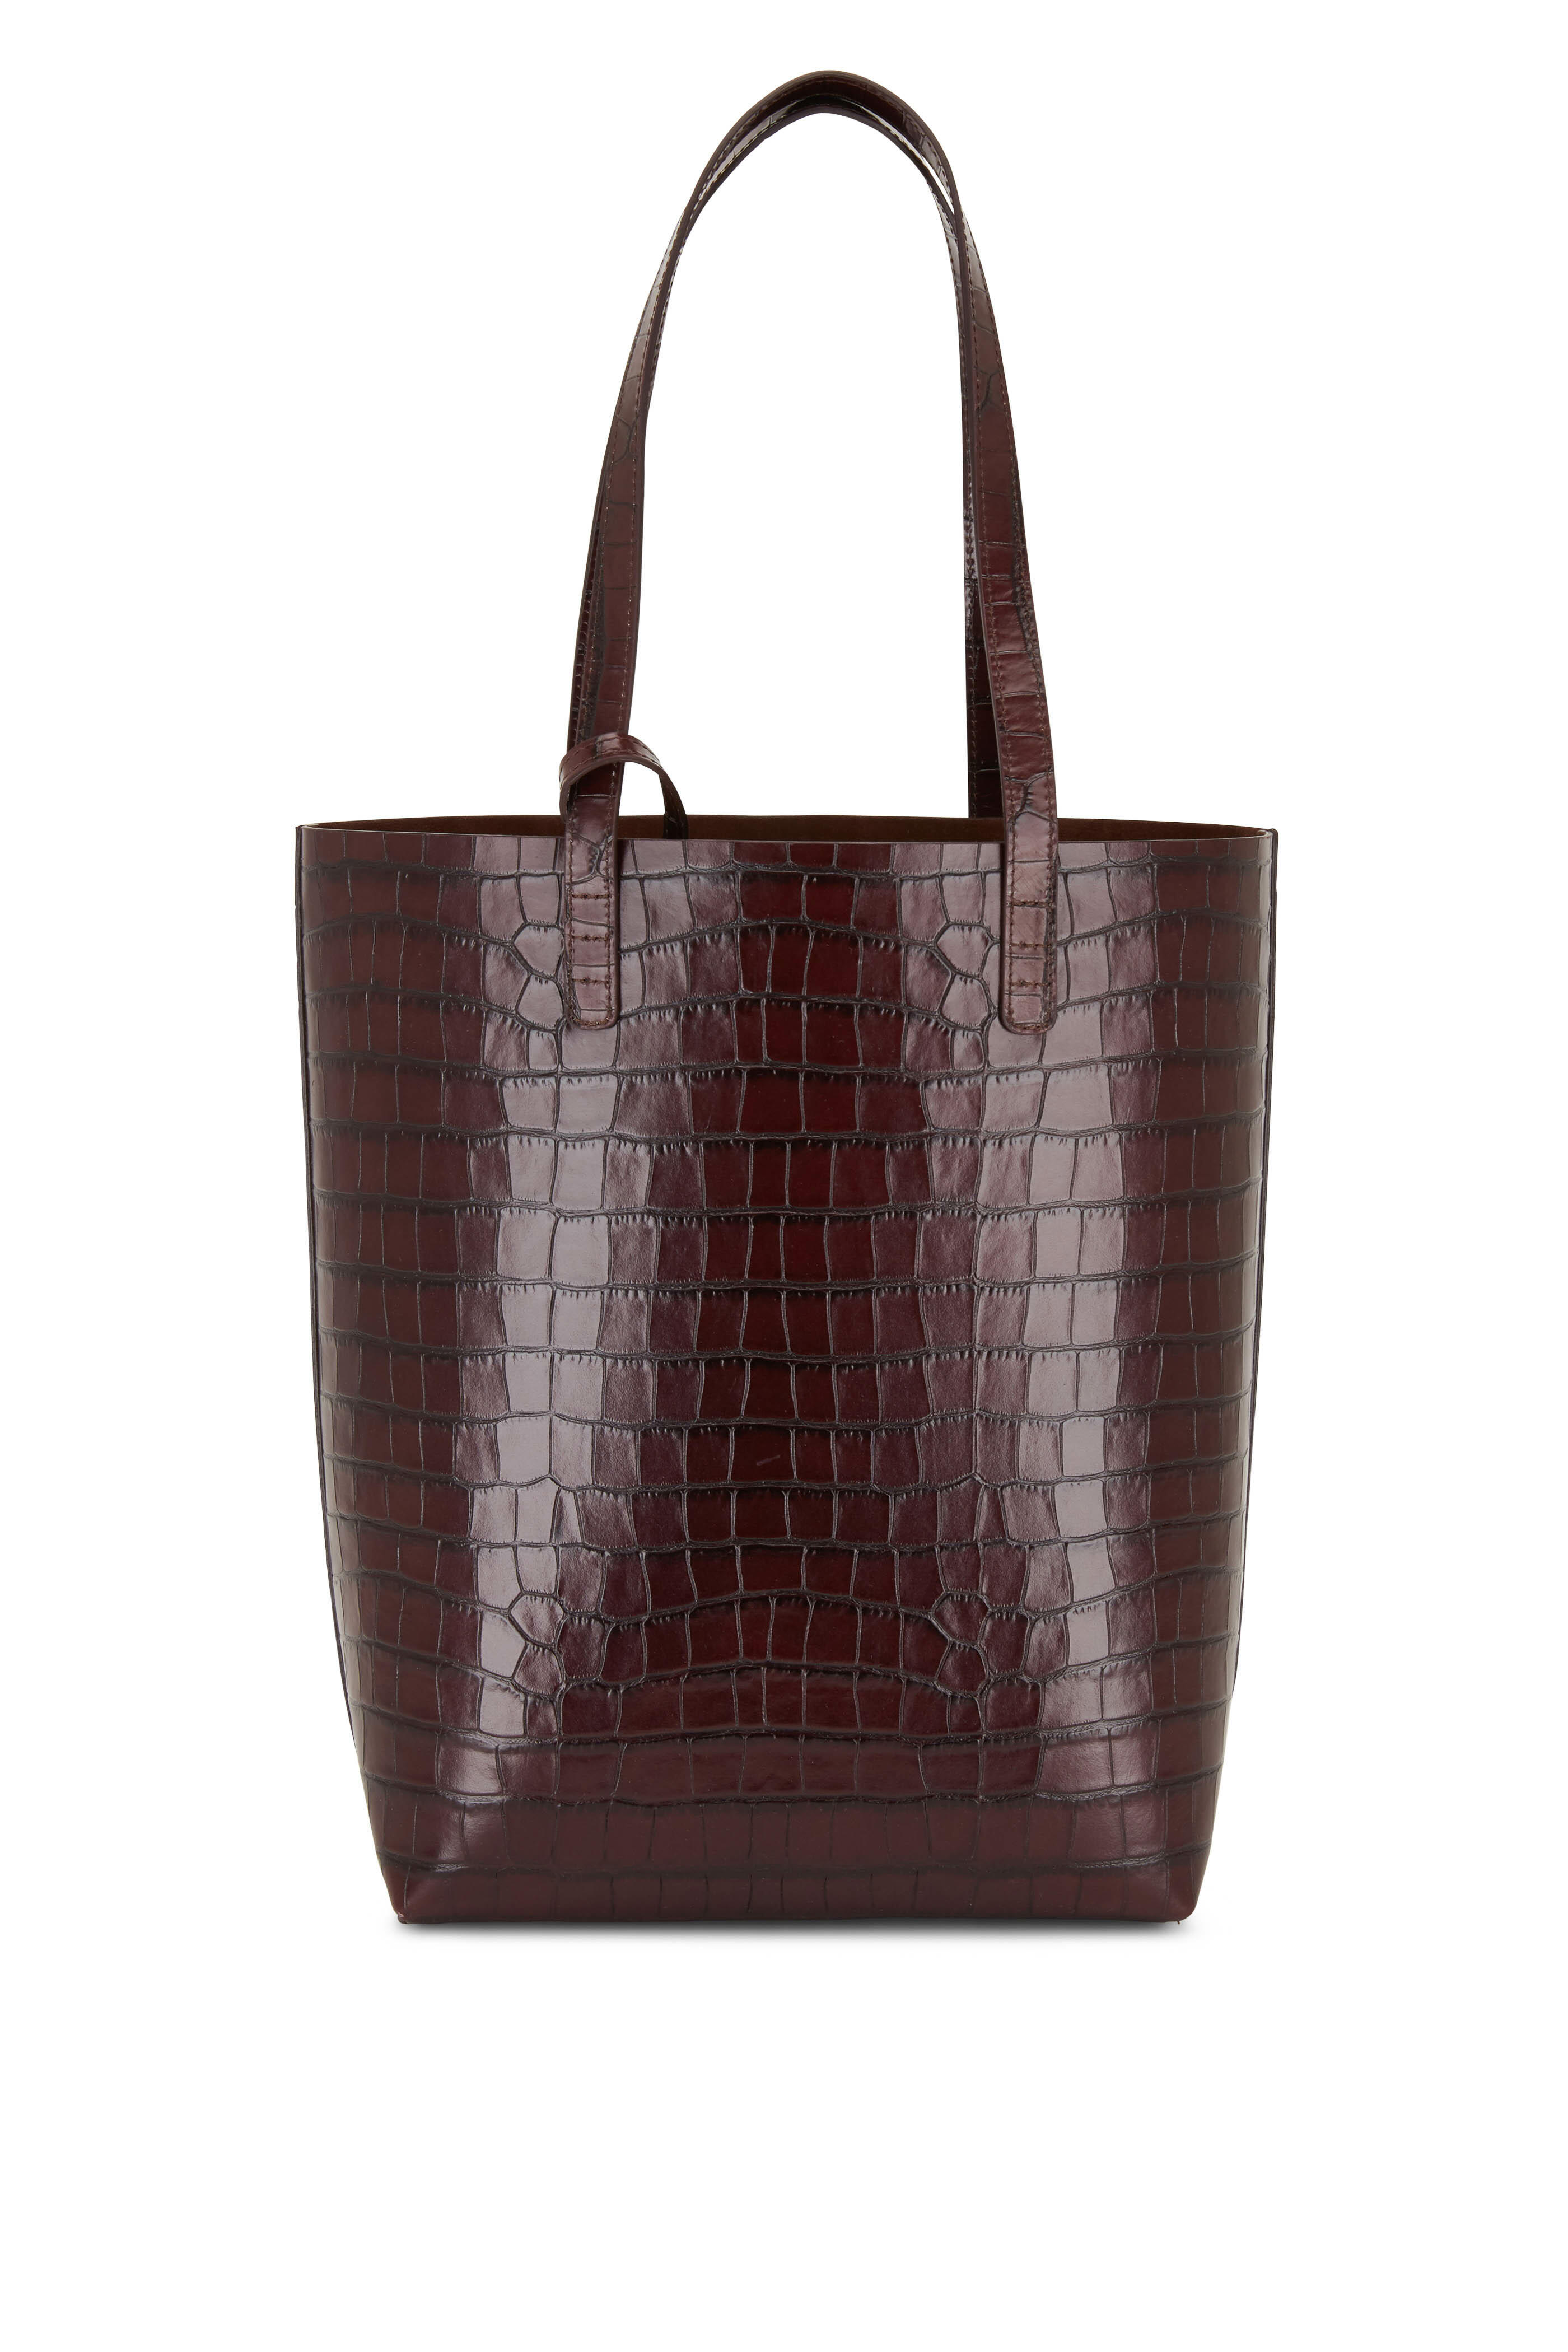 Mansur Gavriel Large Croc Embossed Leather Tote In Agretti